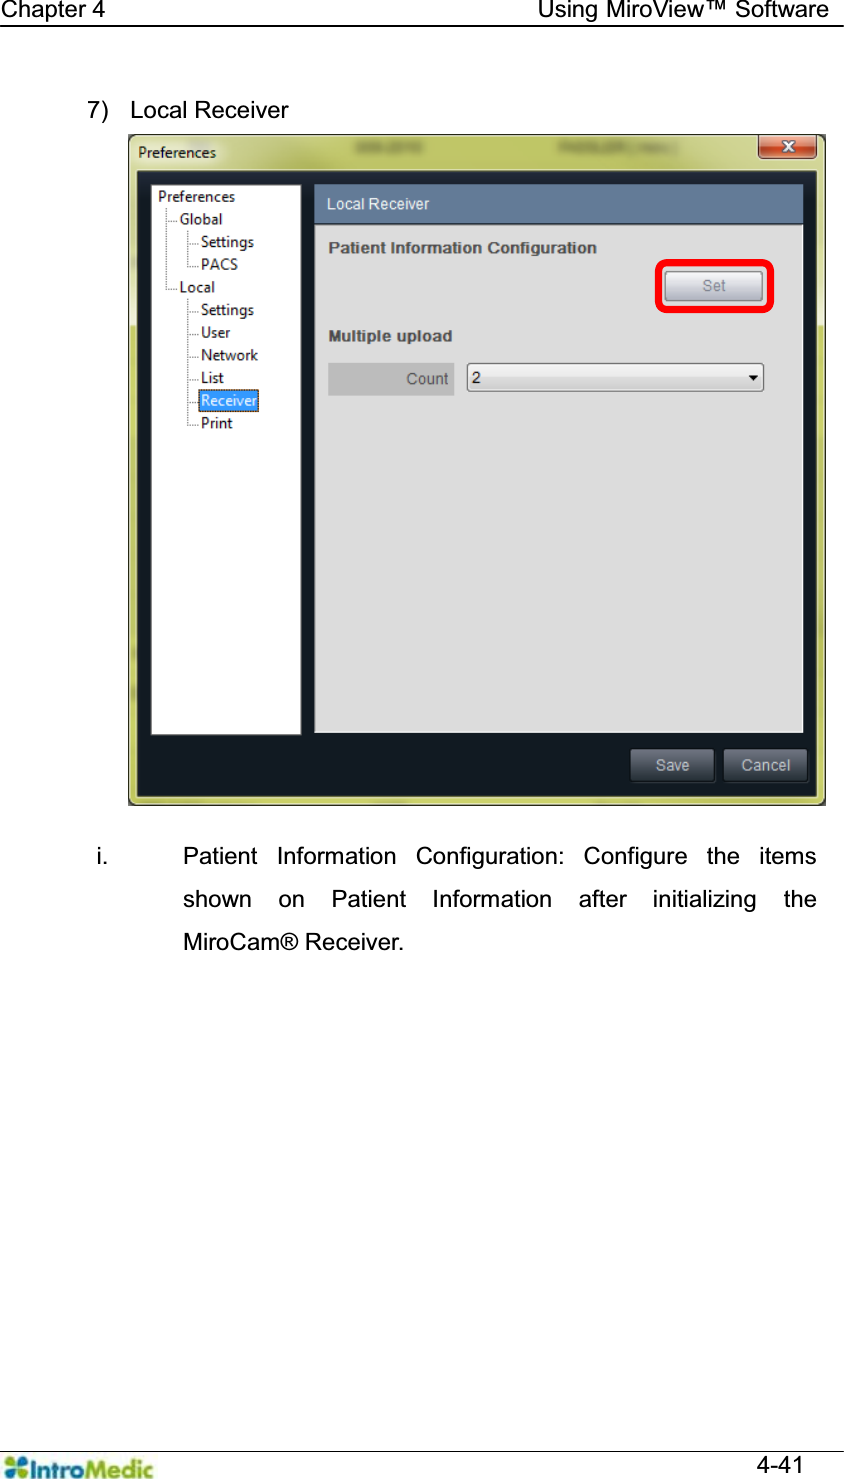   Chapter 4                                    Using 0LUR9LHZ Software  4-41  7) Local Receiver  i. Patient Information Configuration: Configure the items shown on Patient Information after initializing the MiroCam® Receiver. 